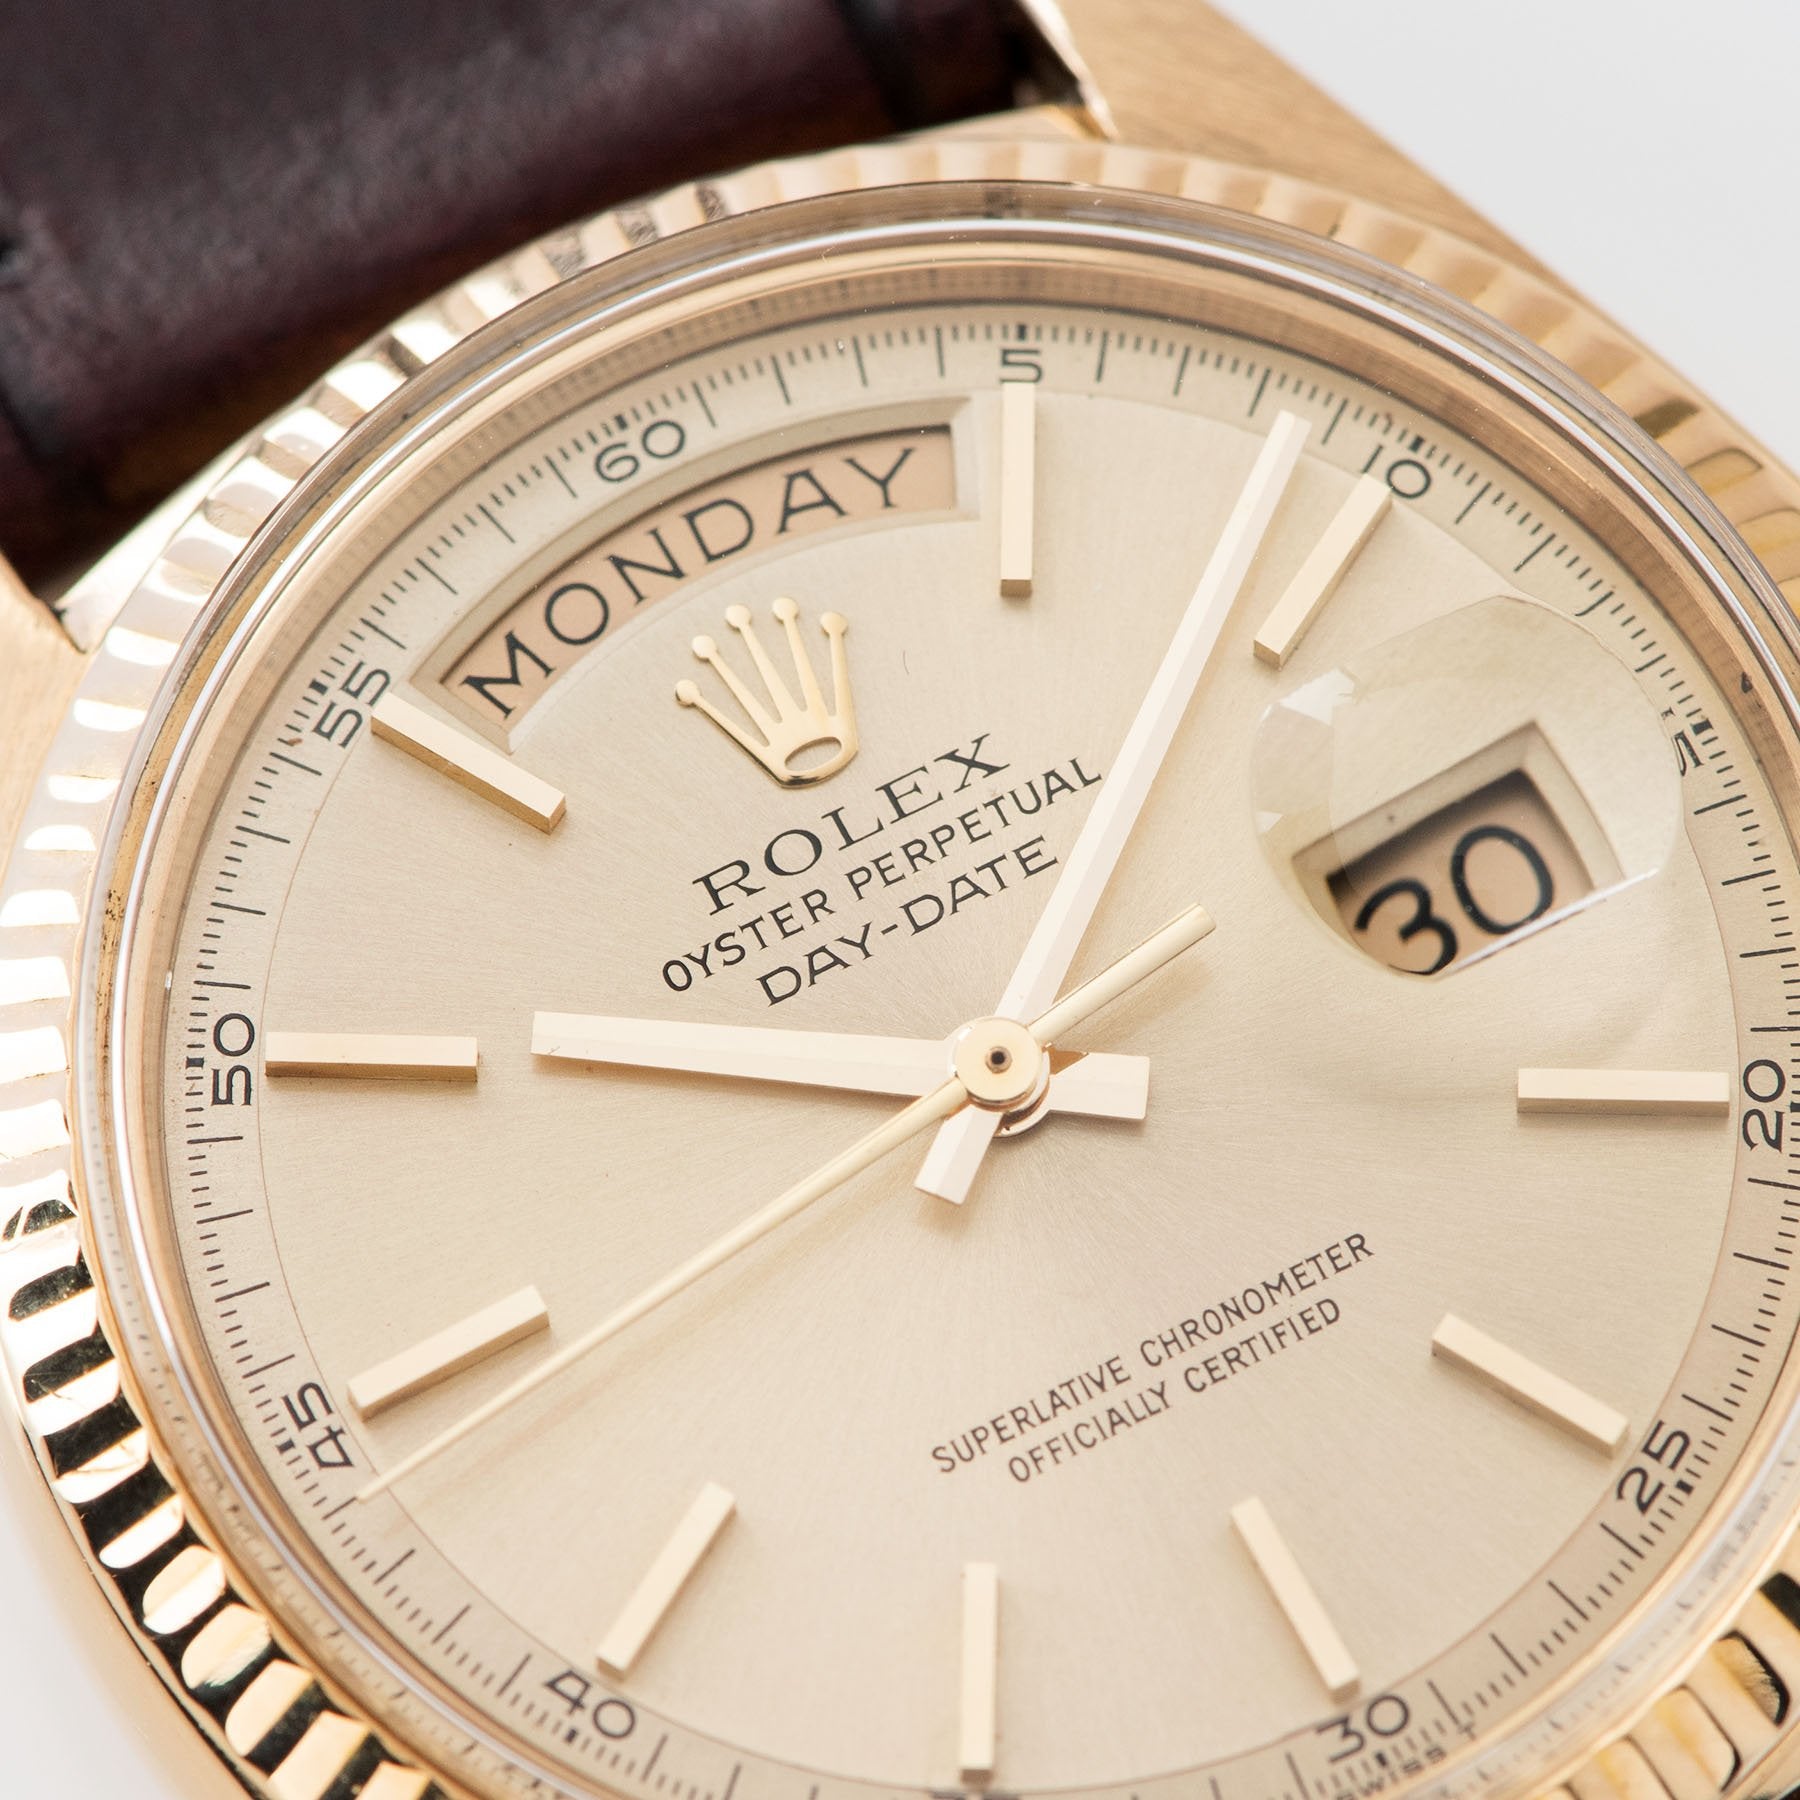 Rolex Day-Date Yellow Gold 1803 Champagne Dial